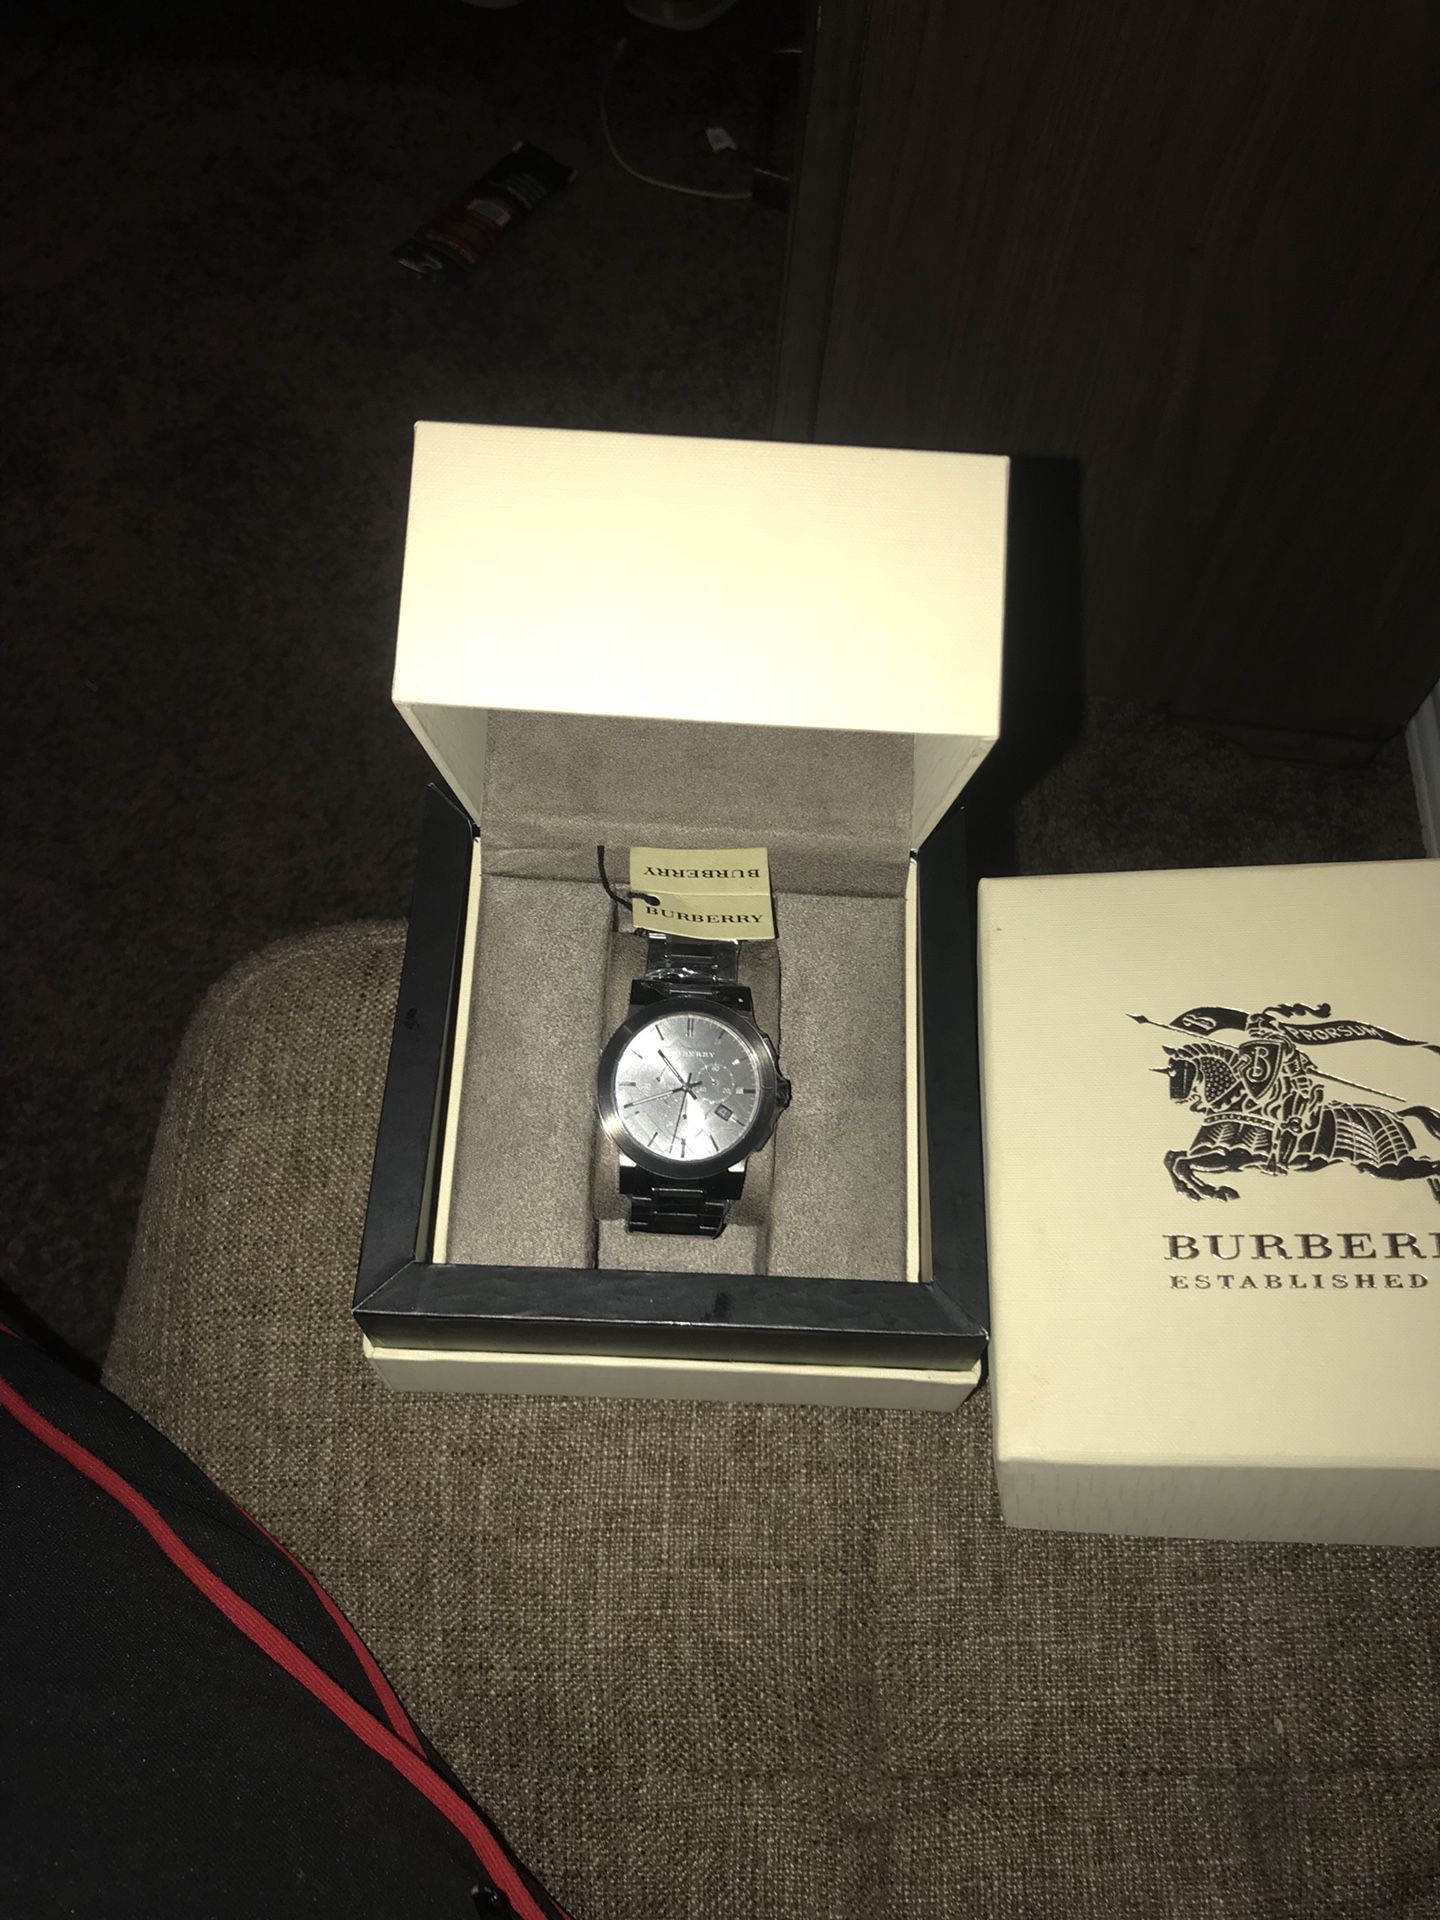 Authentic Burberry watch brand new never worn